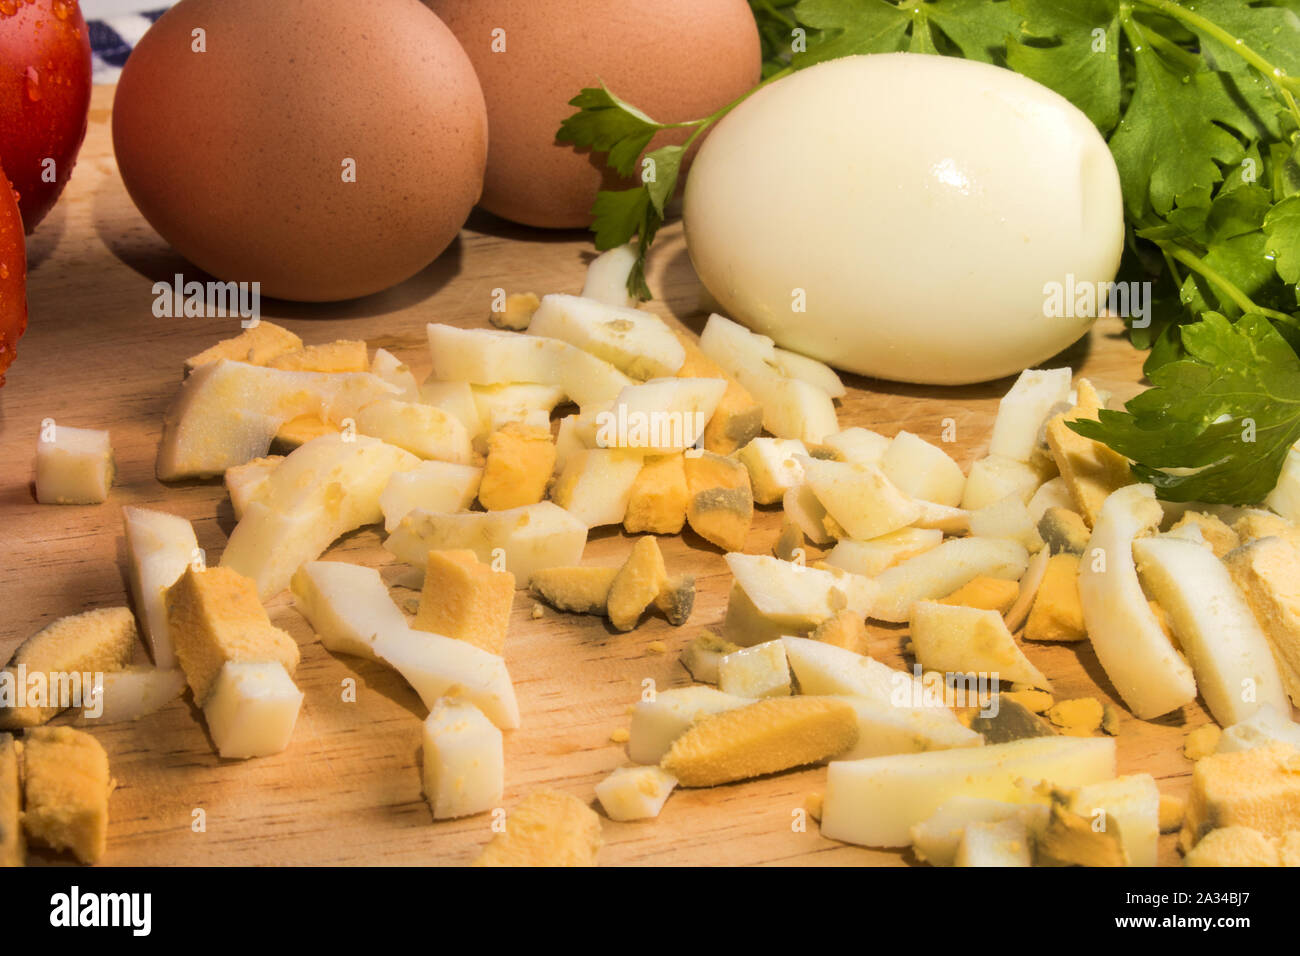 hard boiled eggs, also sliced for egg salad on a wooden board Stock Photo